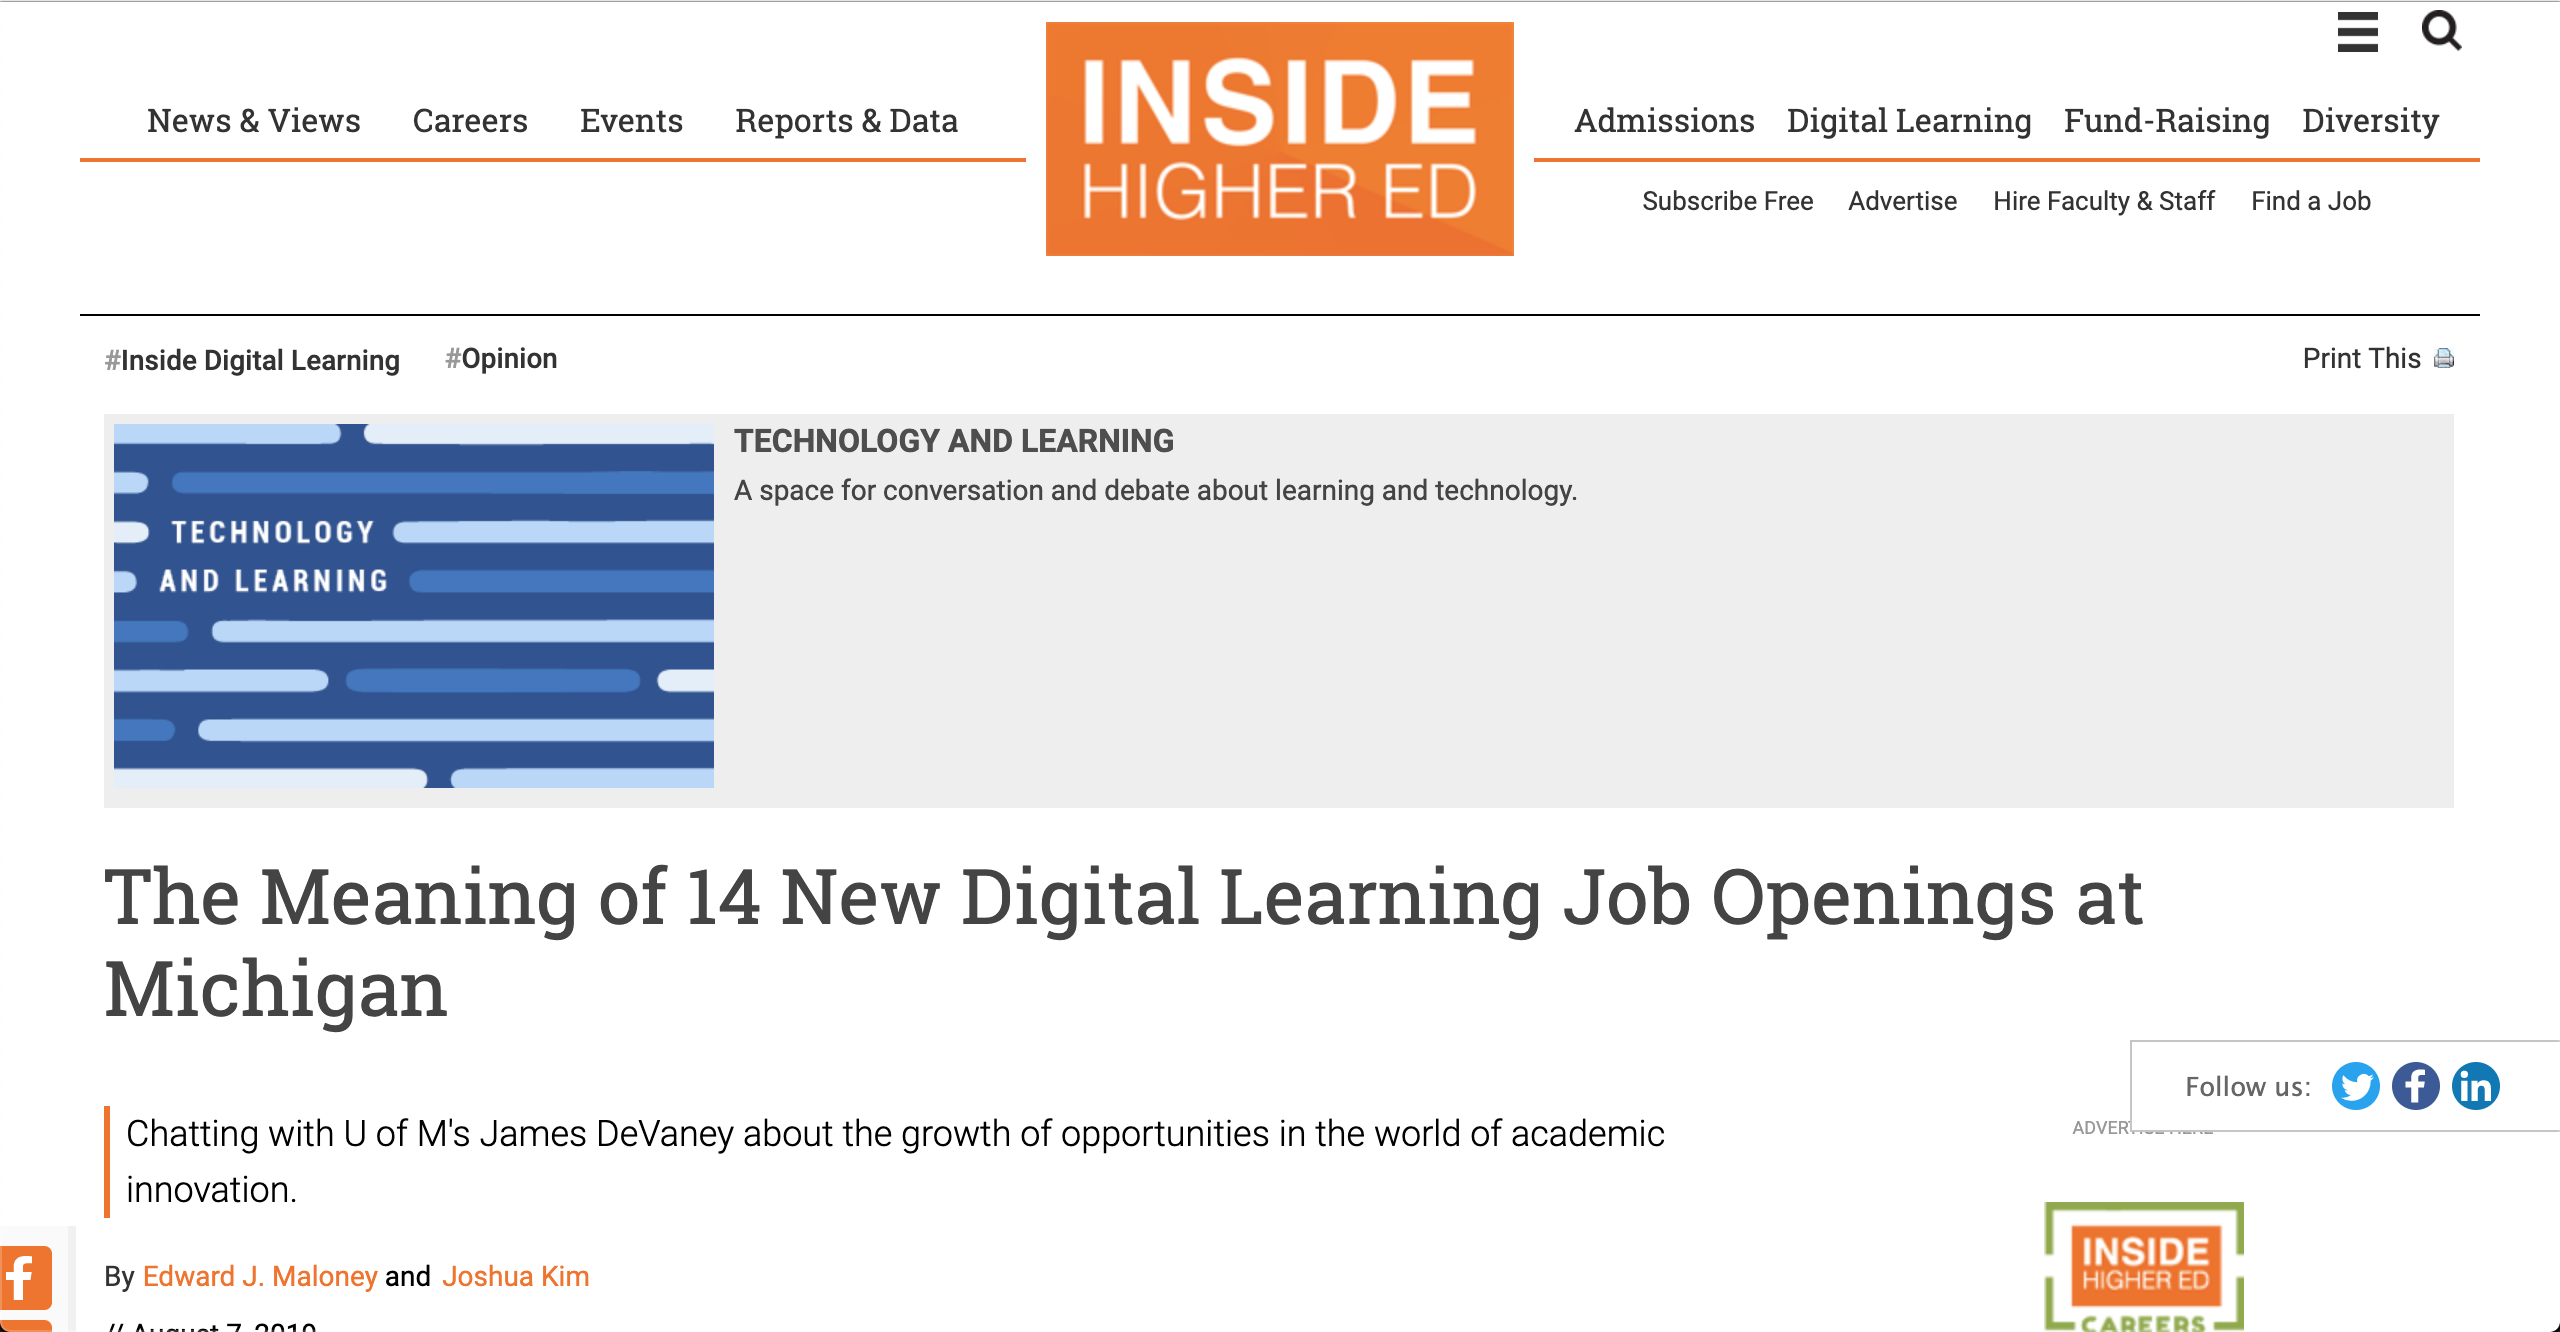 The Meaning of 14 New Digital Learning Job Openings at Michigan